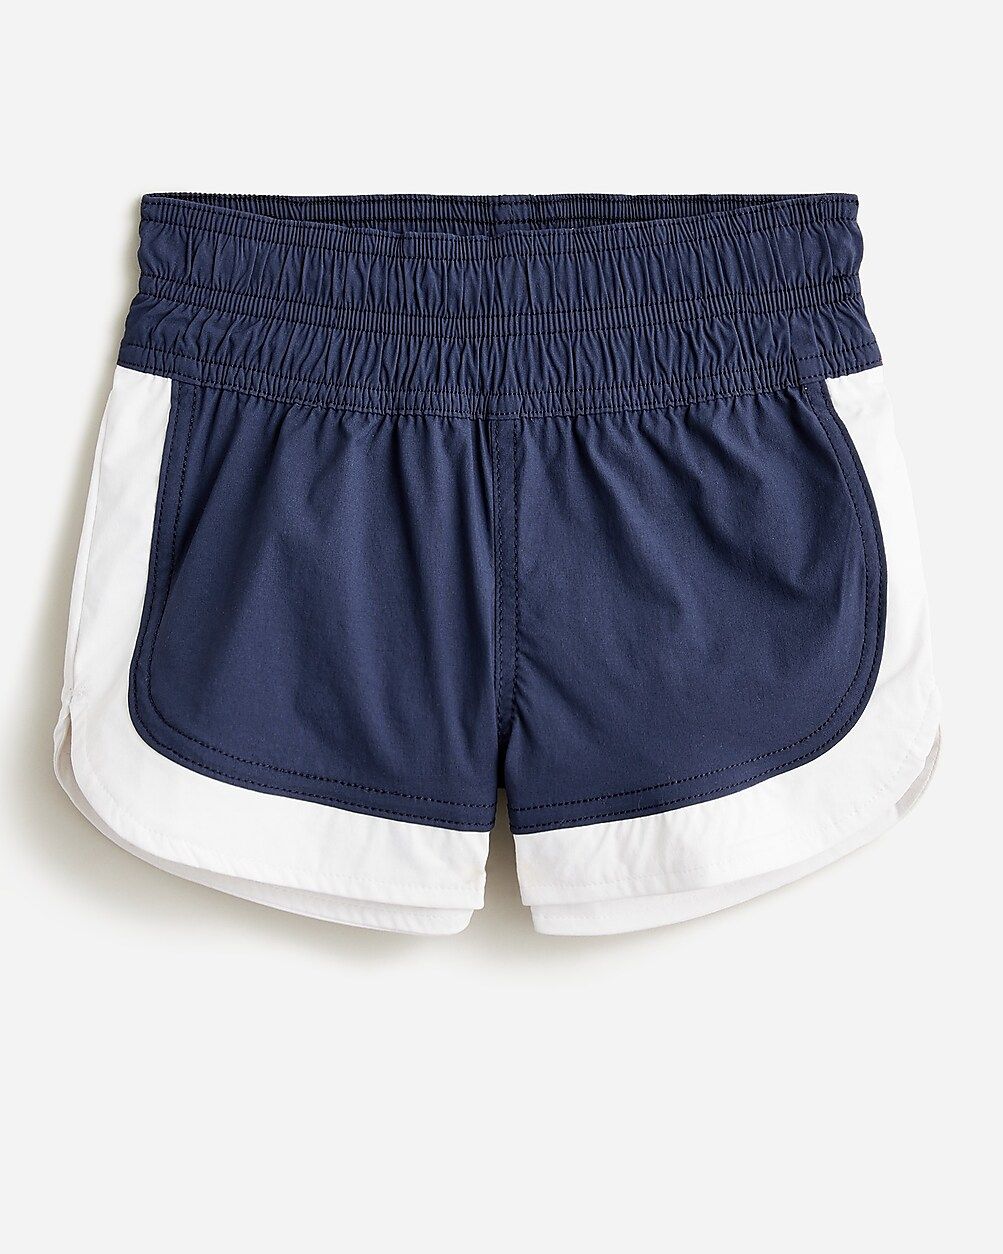 How to wear itGirls' dolphin-hem active short$29.50$59.50 (50% Off)Limited time. Price as marked.... | J.Crew US